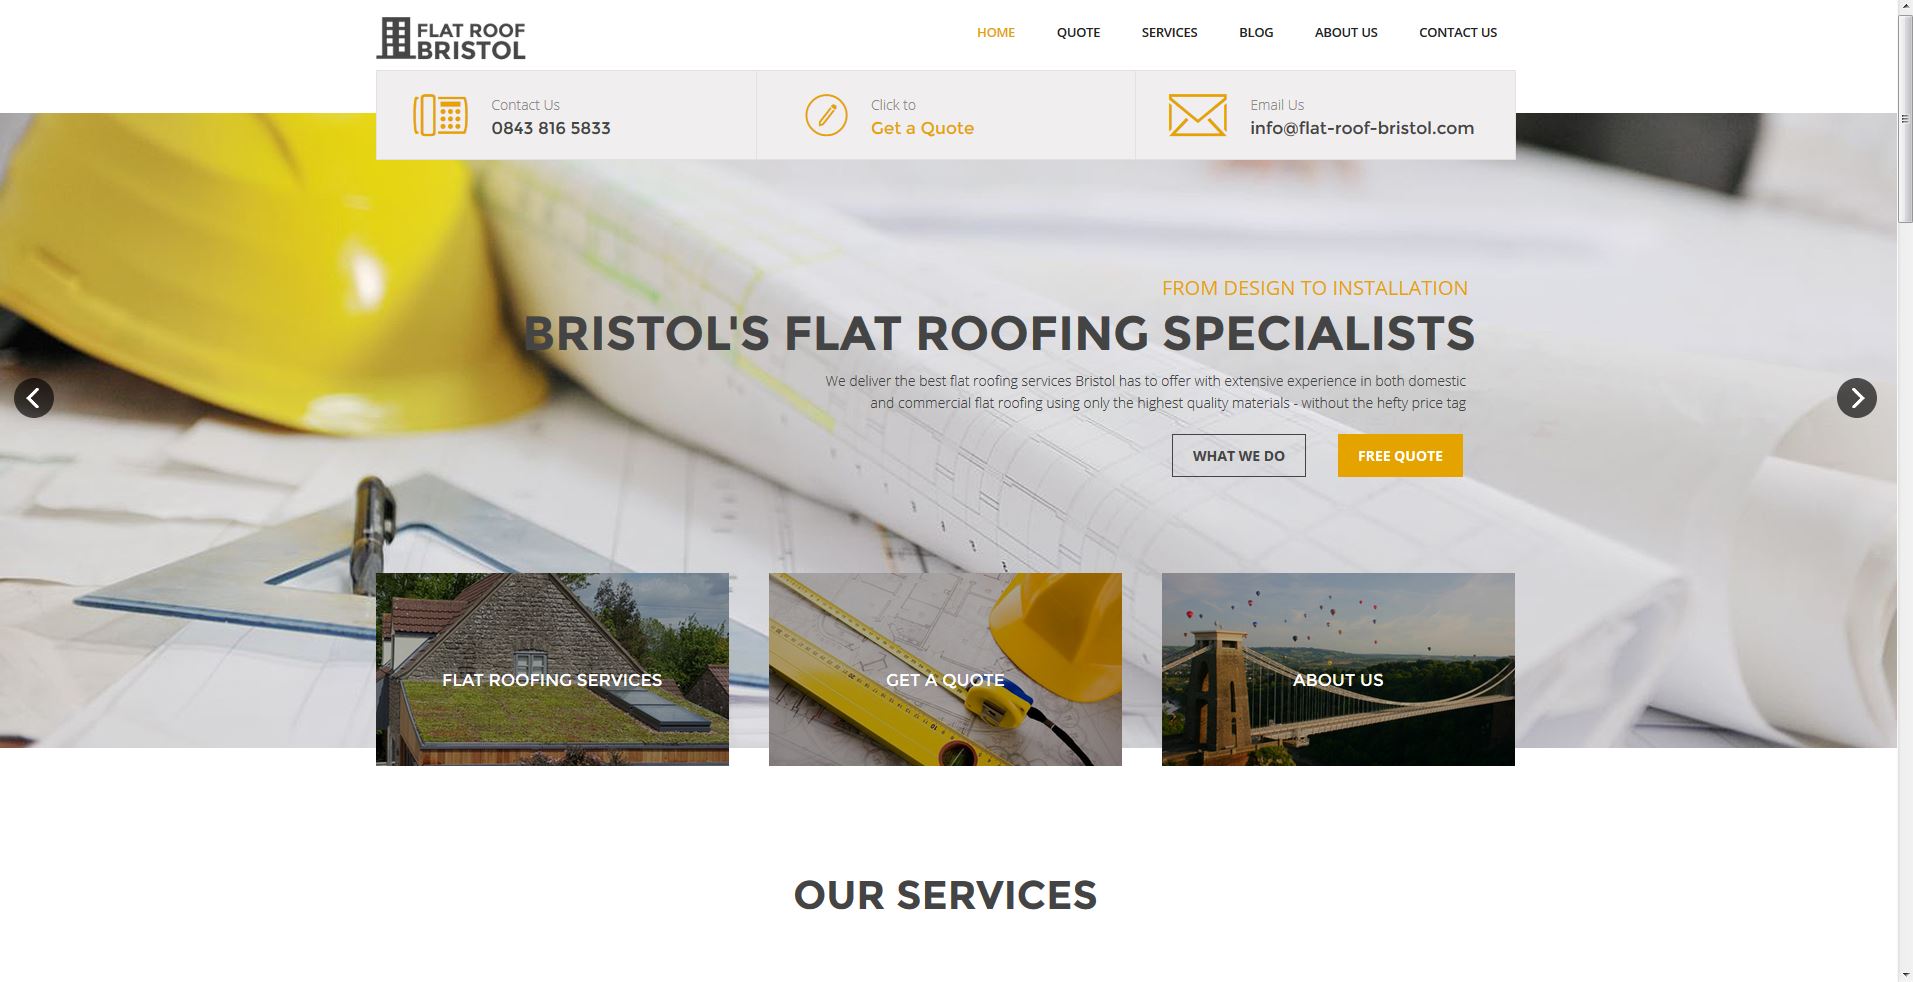 New website for Flat Roof Bristol